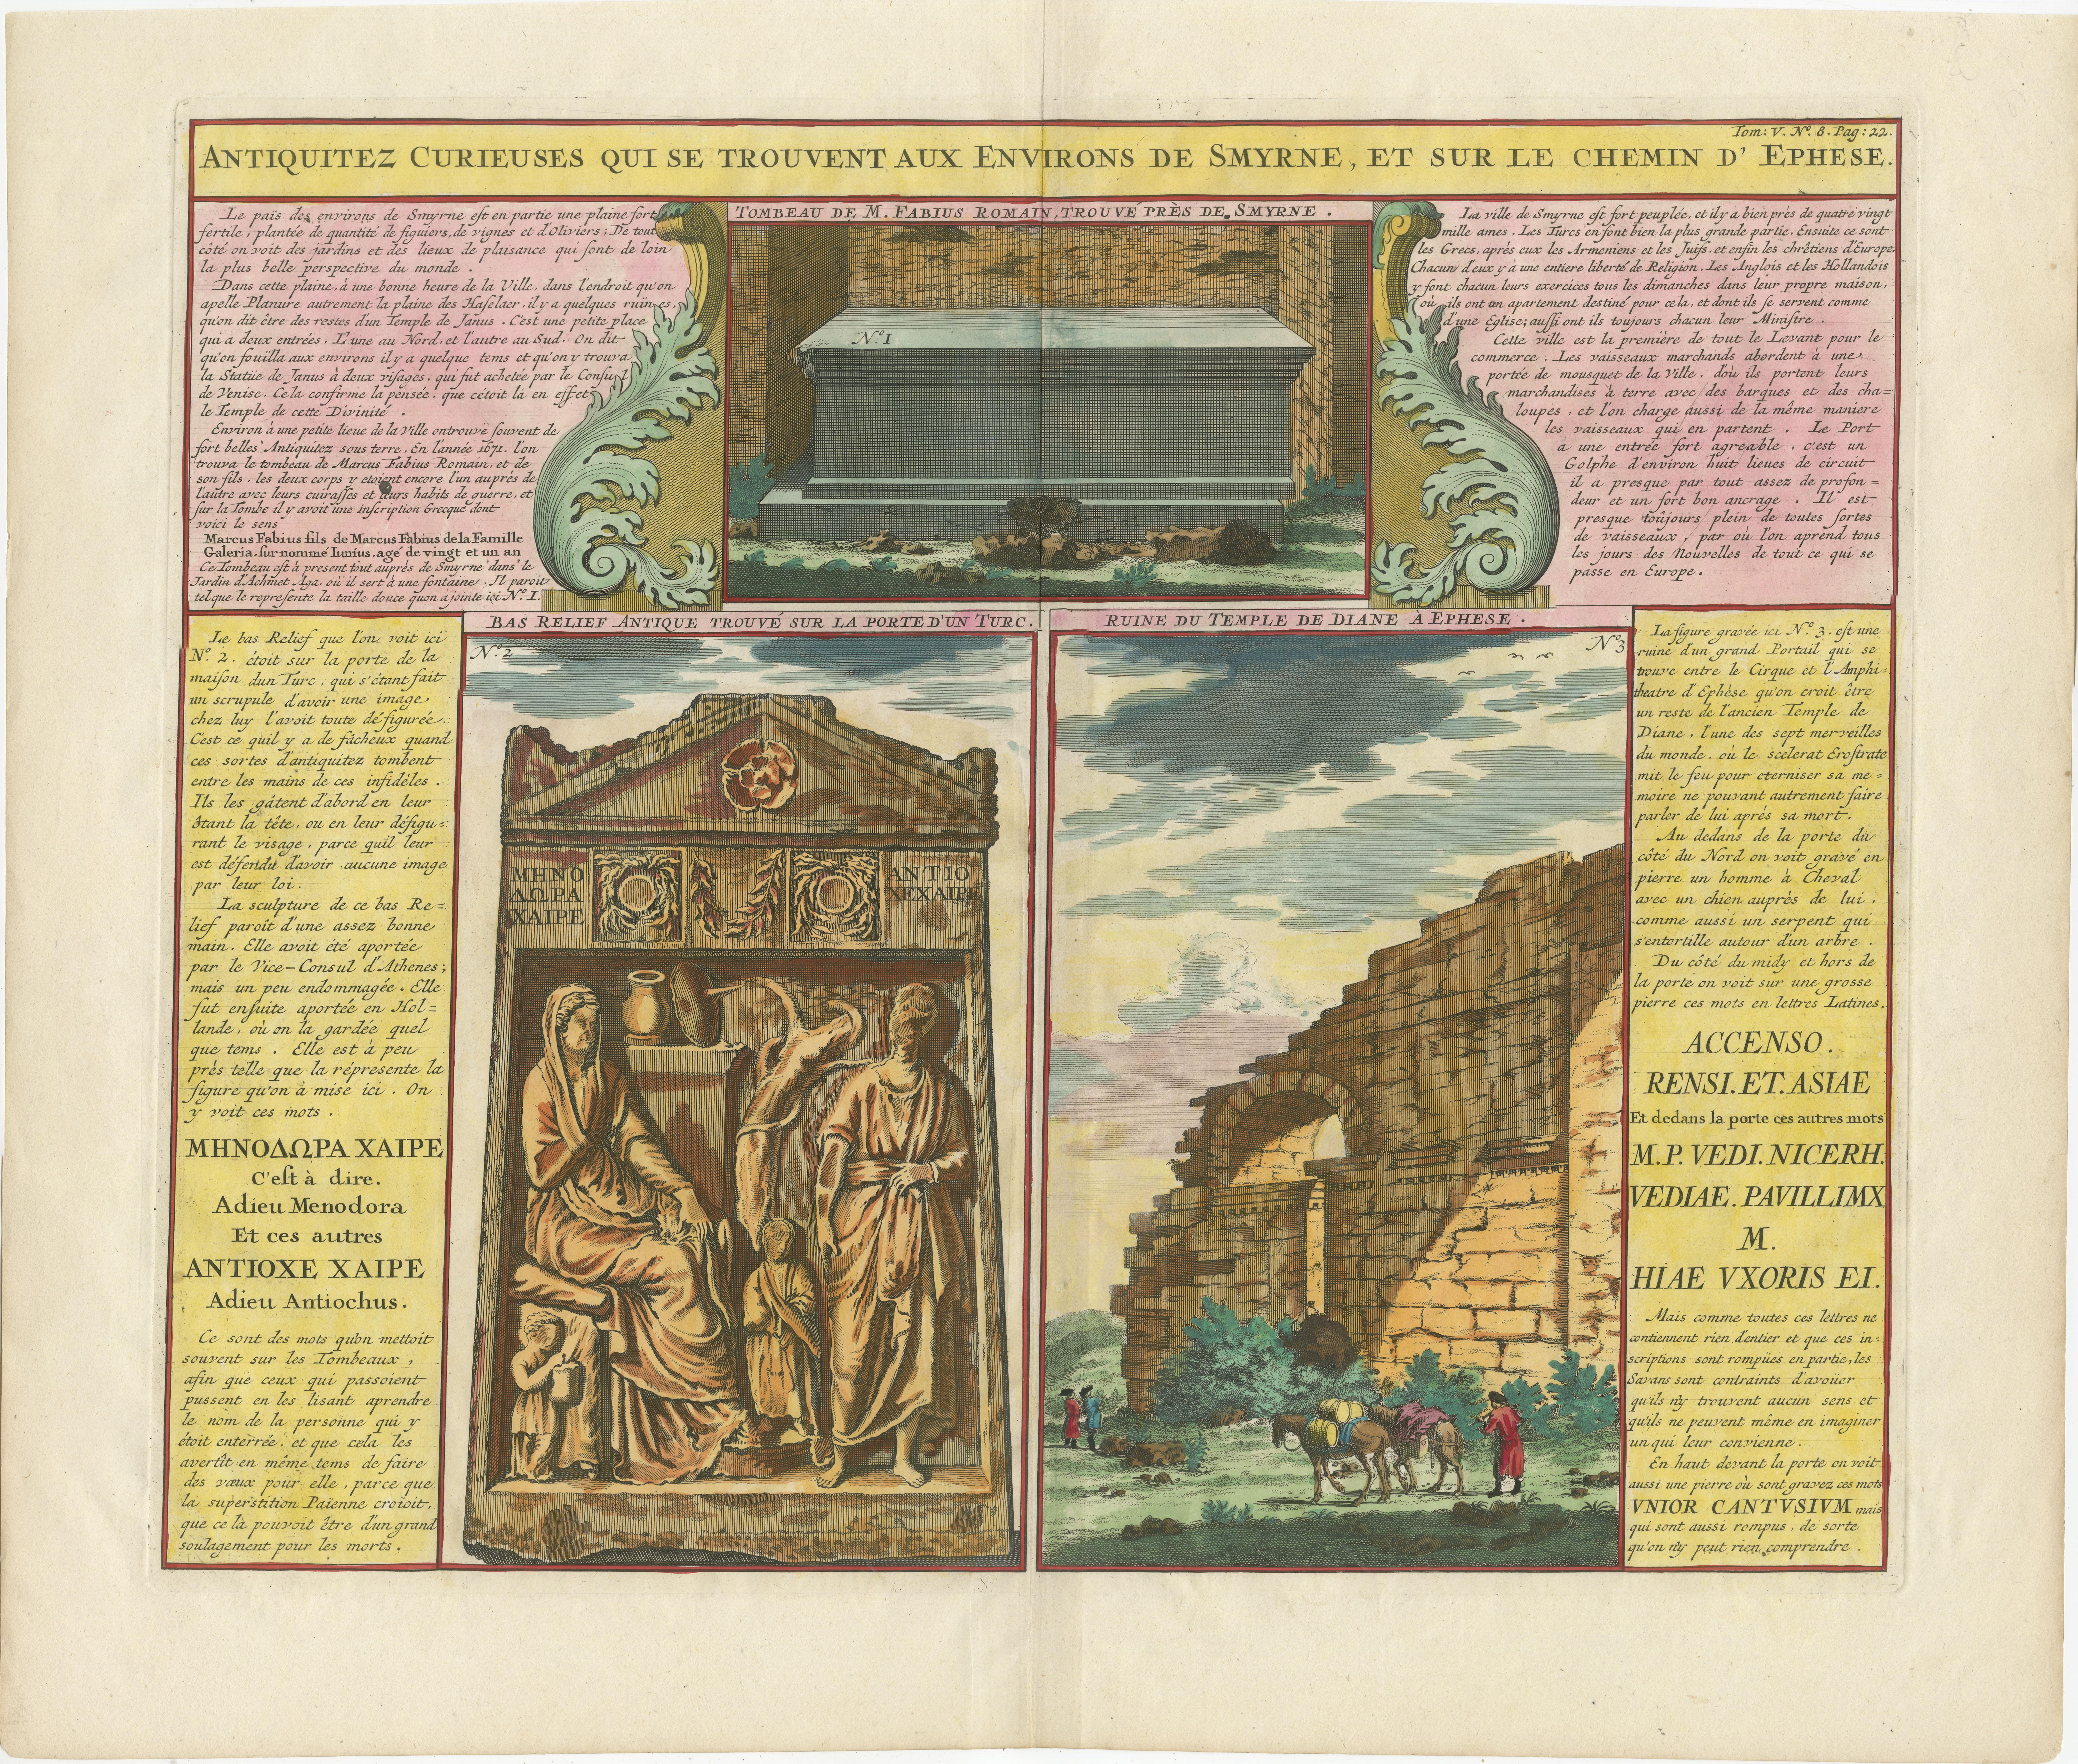 Antique print titled 'Antiquitez Curieuses qui se trouvent aux Enviorons de Smyrne (..)'. Engraved views showing monuments in Ephesus which was an ancient Greek city on the coast of Ionia, present-day in Izmir province. Includes descriptive text.